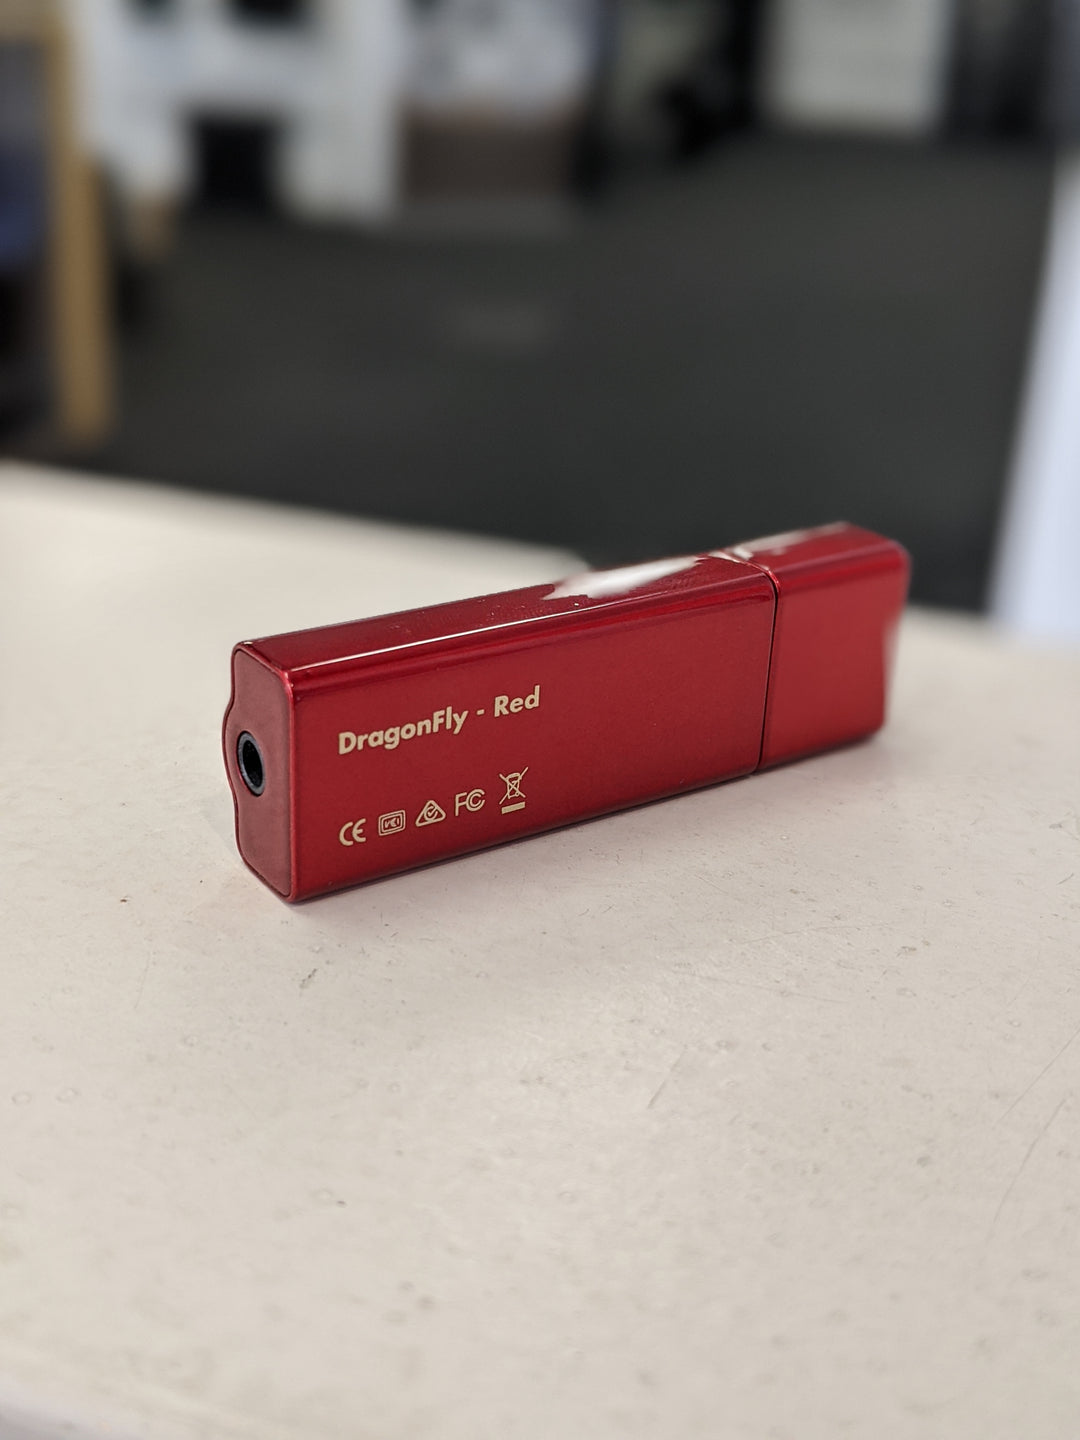 Audioquest Dragonfly Red USB DAC / Headphone Amp